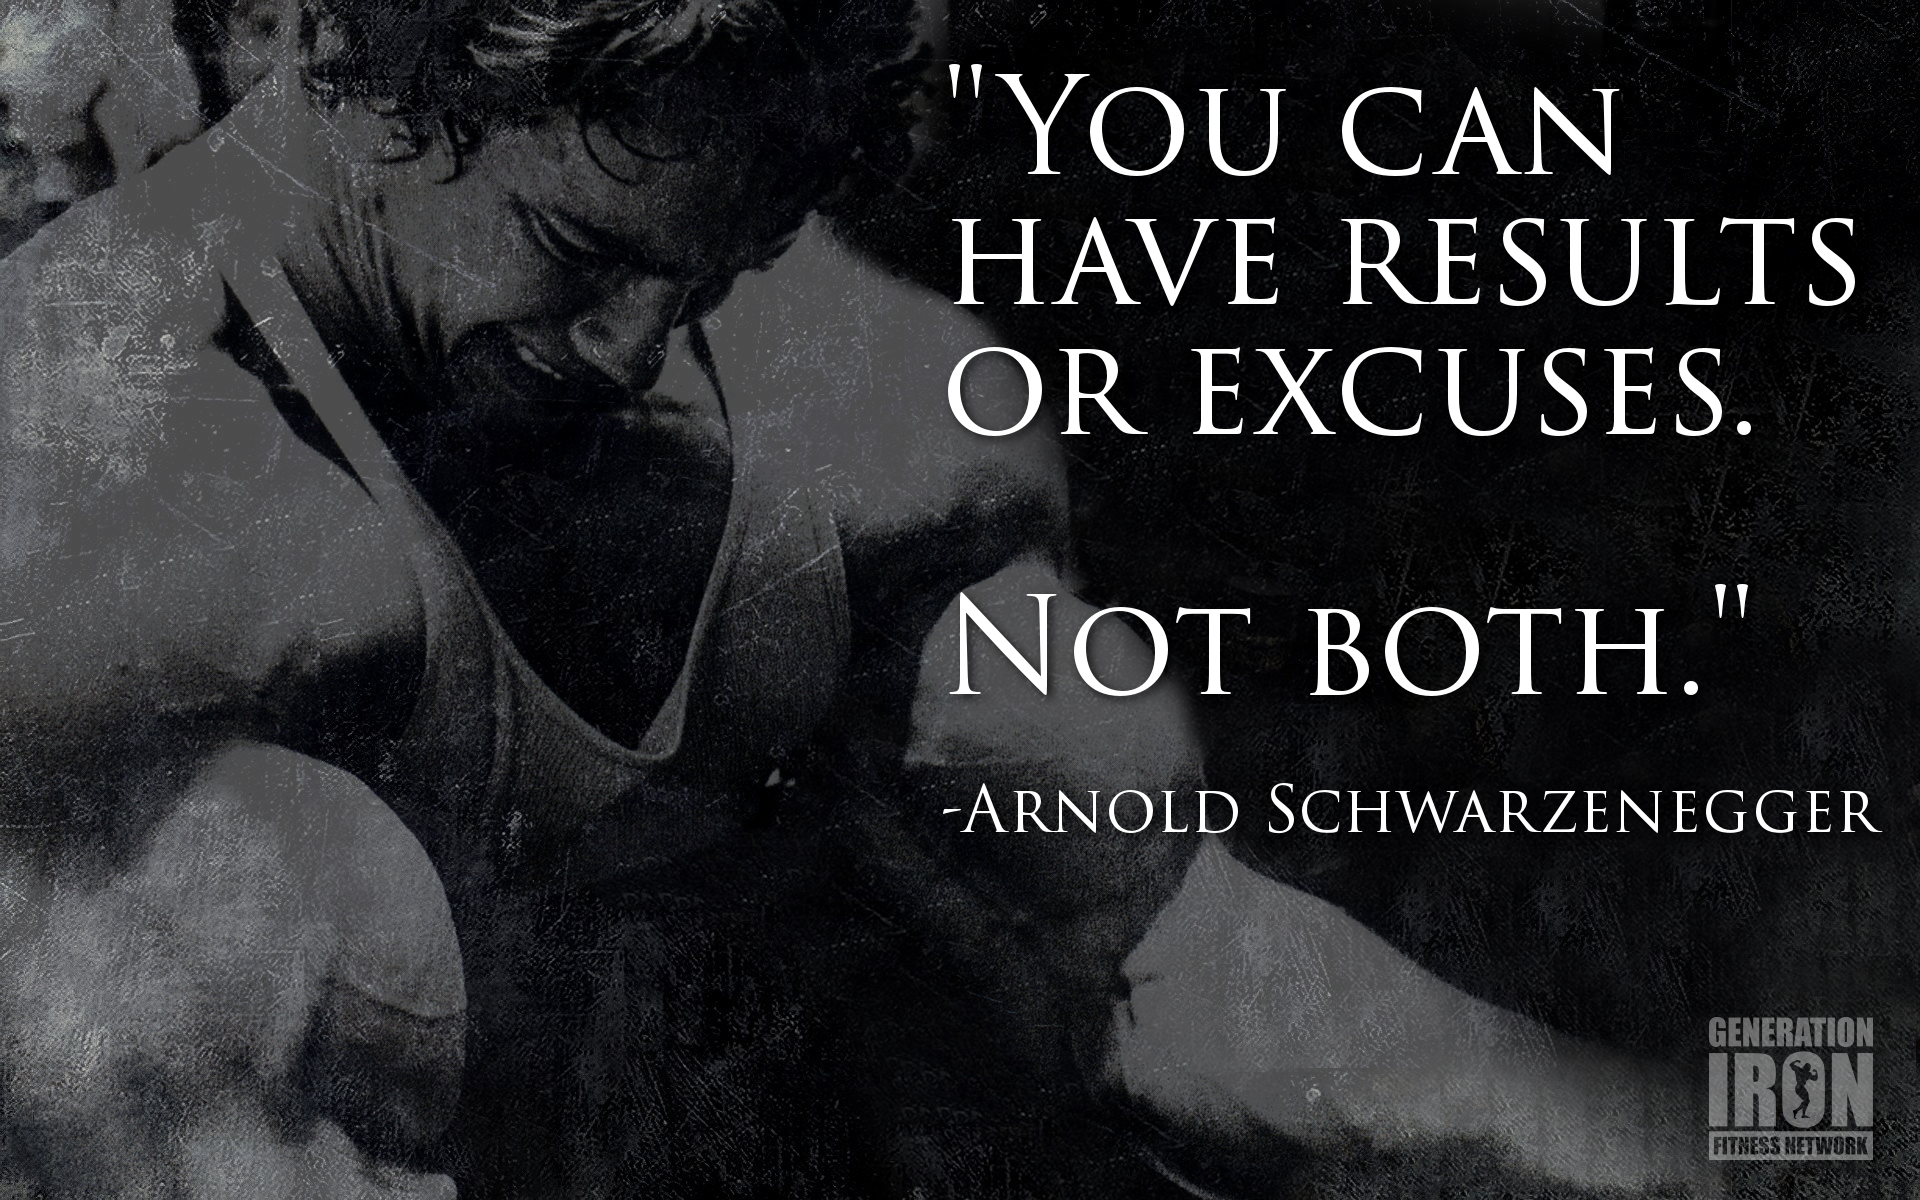 Quote Of The Week: Arnold Schwarzenegger - Generation Iron Fitness